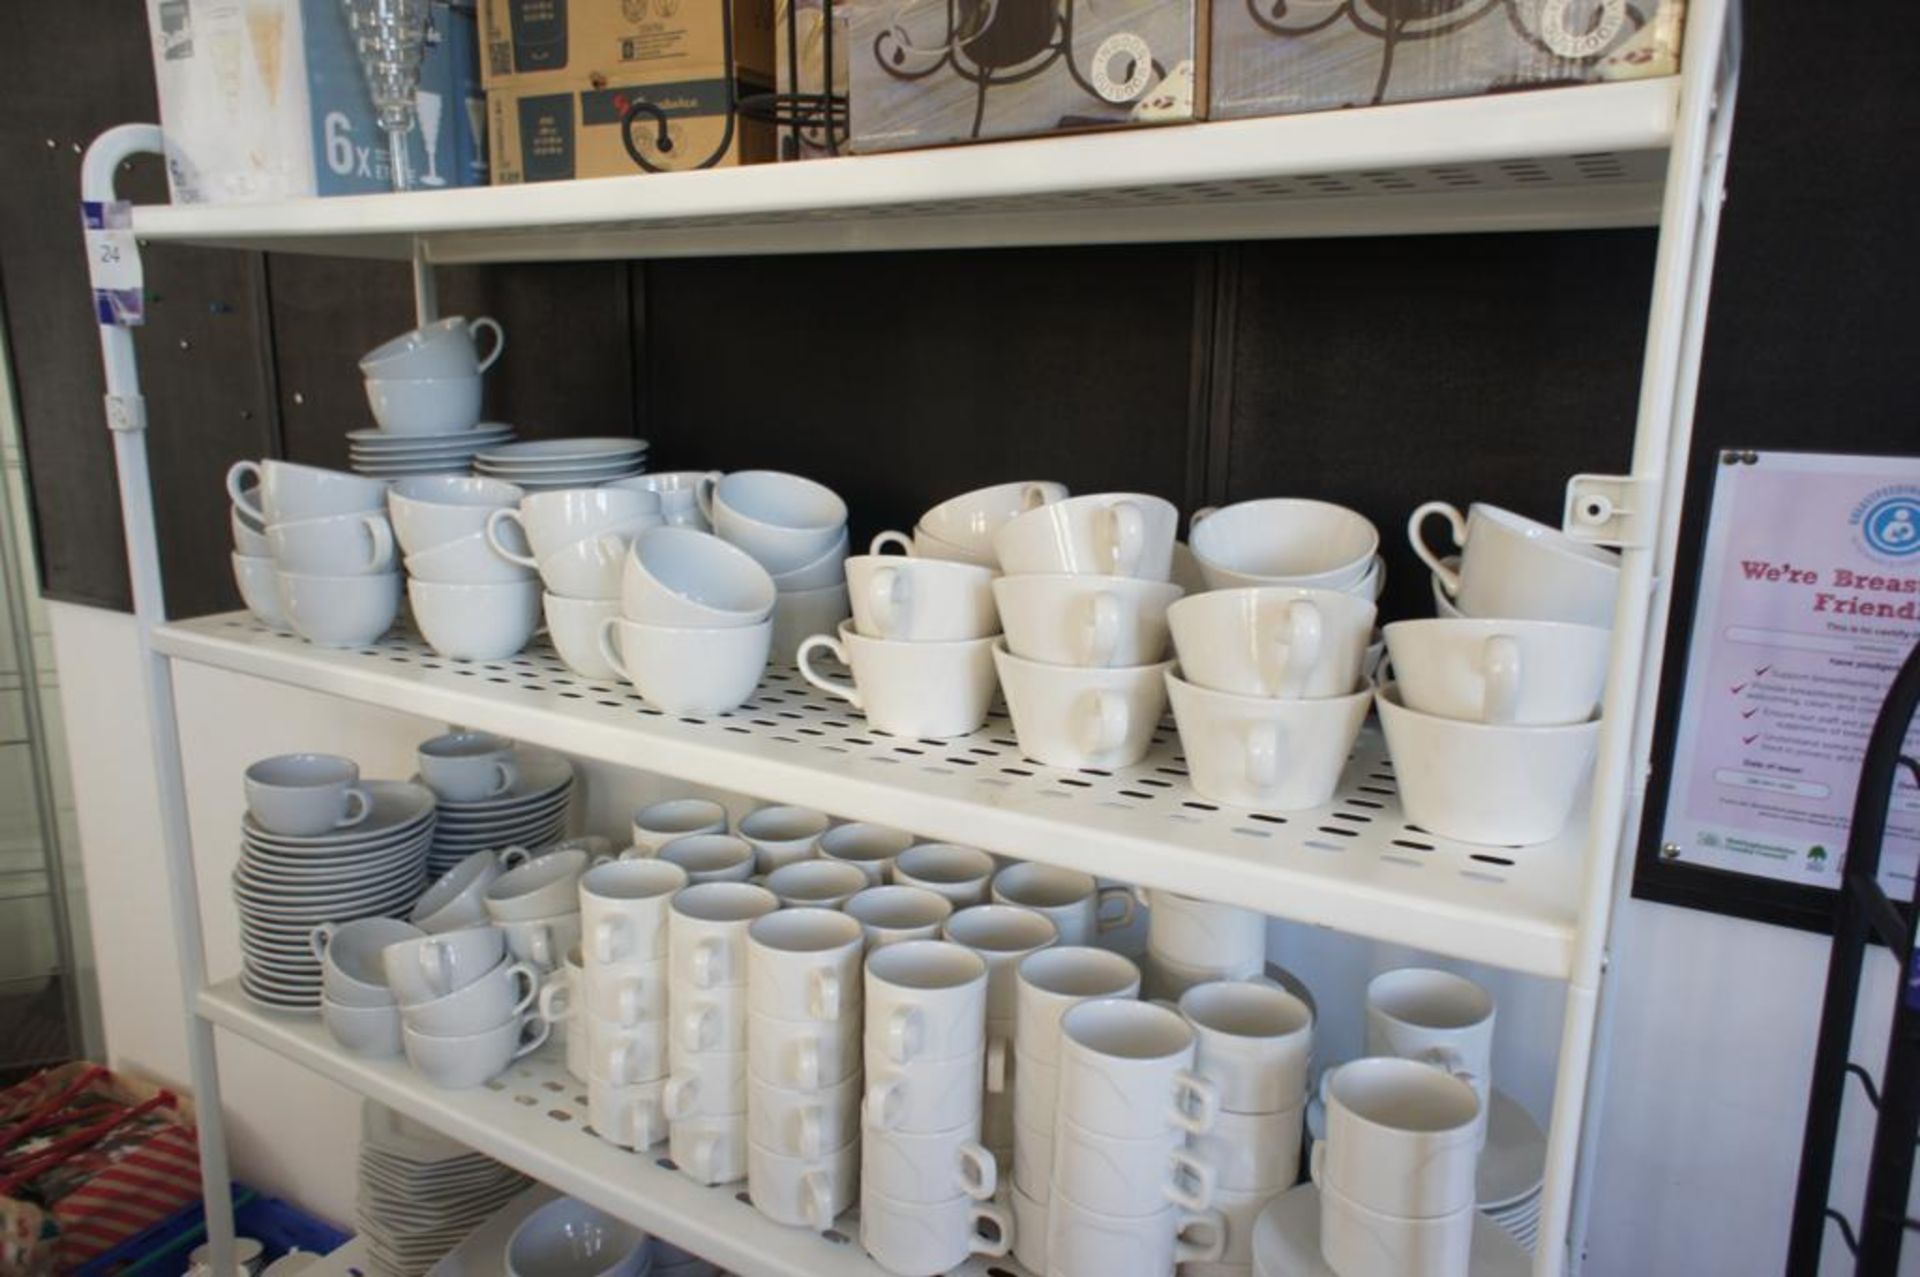 5-Tier Metal Storage Rack & Contents including Glassware, Cups, Bowls, Plates etc. - Image 3 of 8